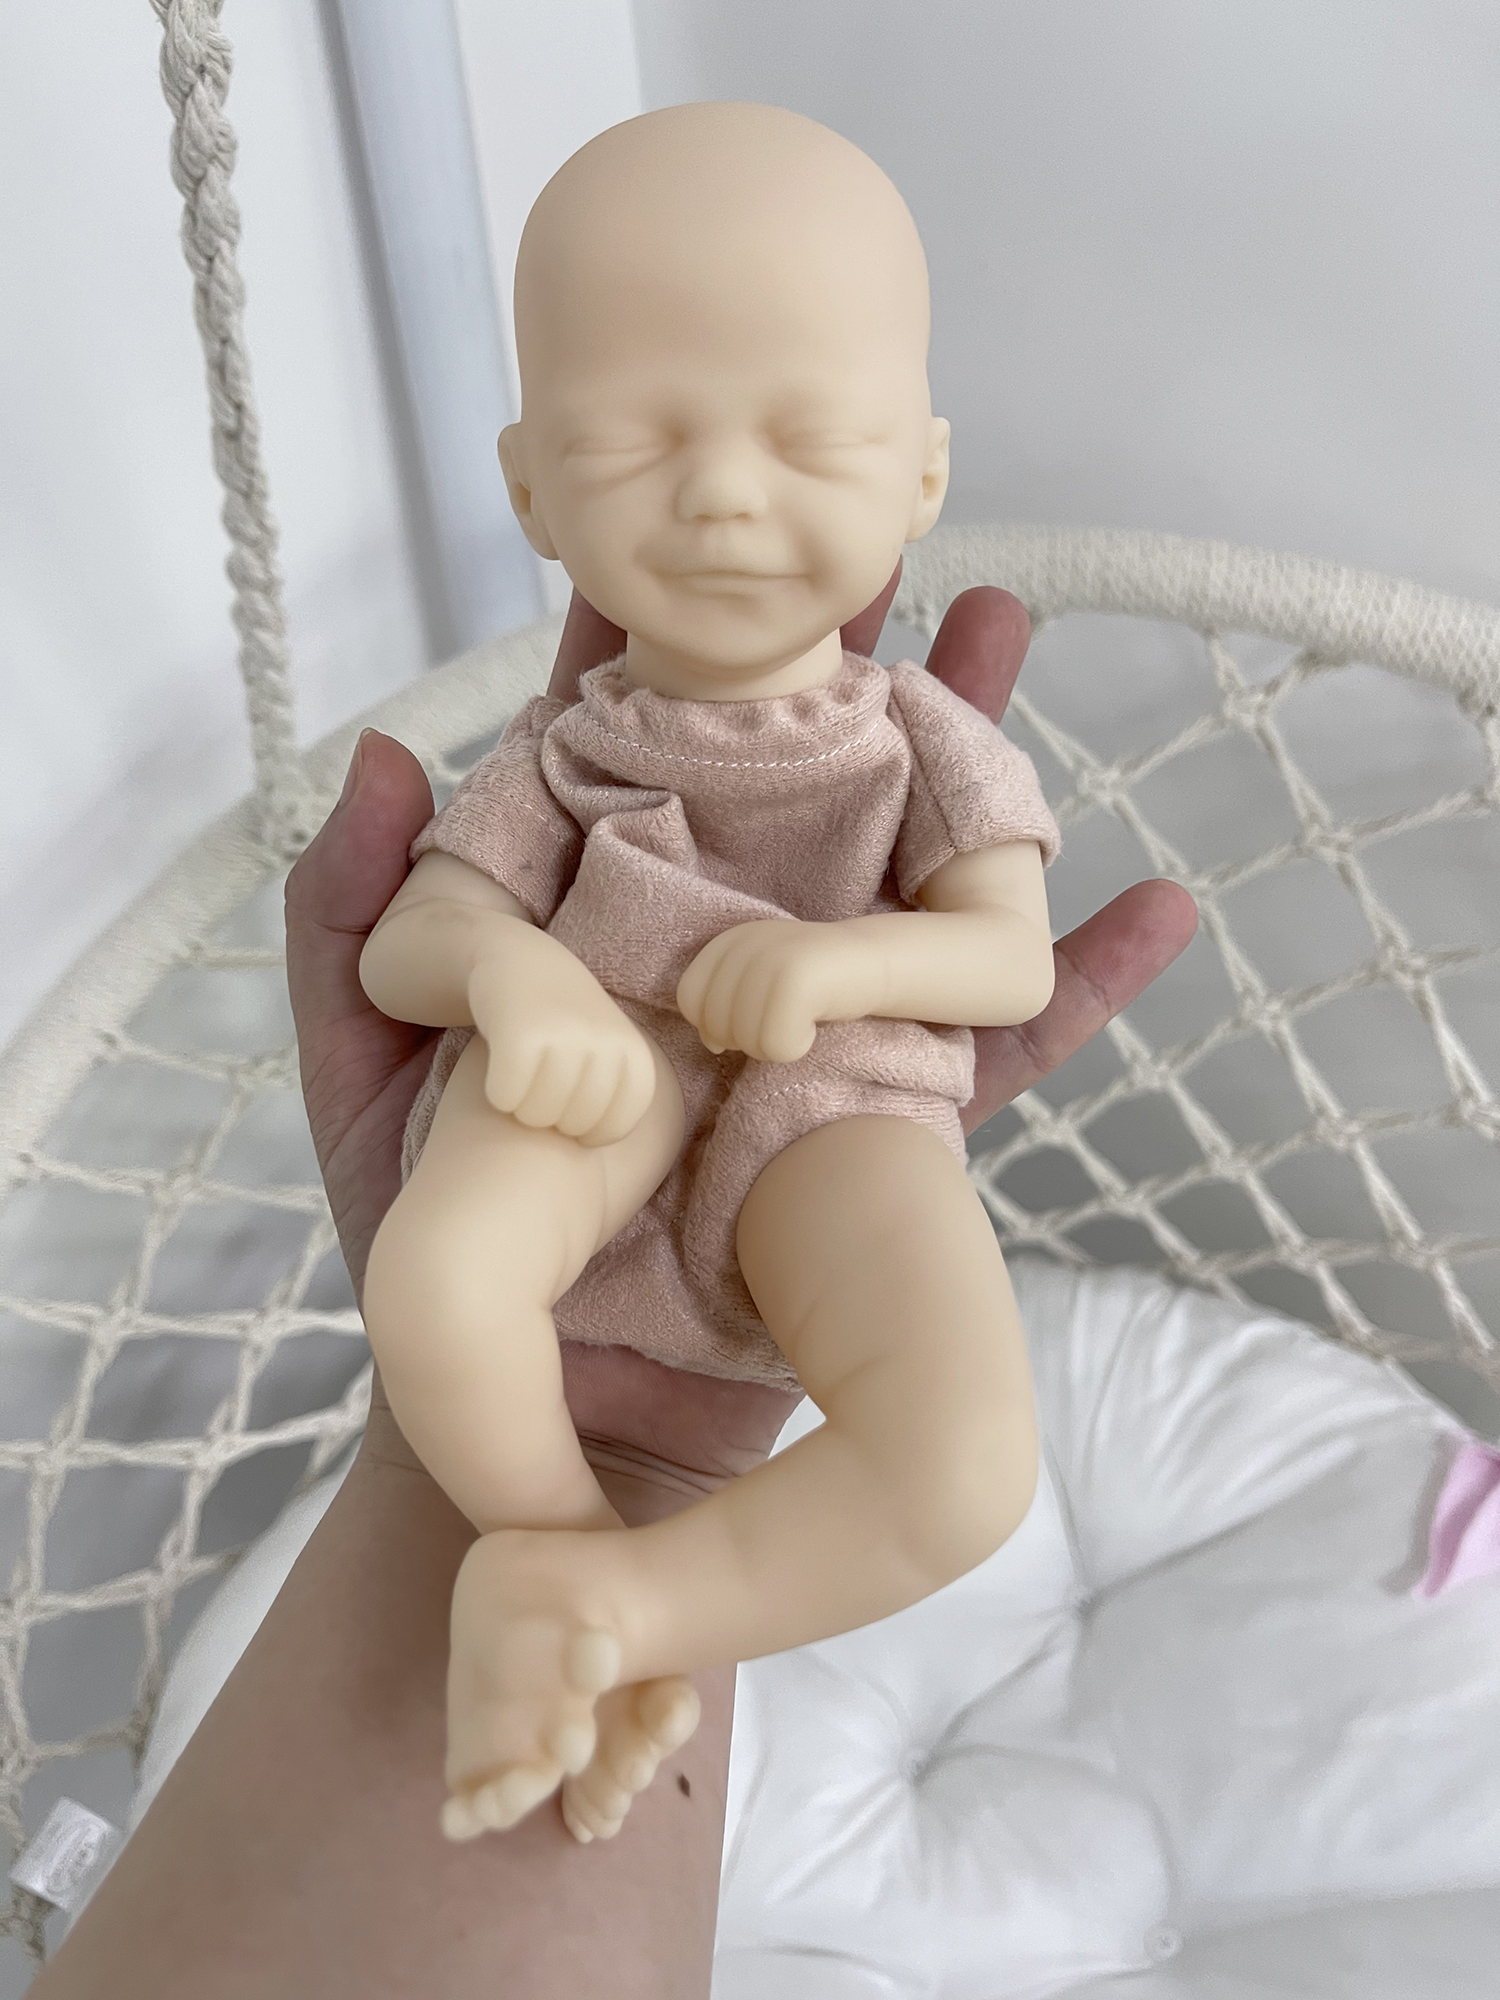 Reborn Kit 9in Newborn Baby Soft Vinyl Doll Kit Wee-Mouse Unpainted Unassembled